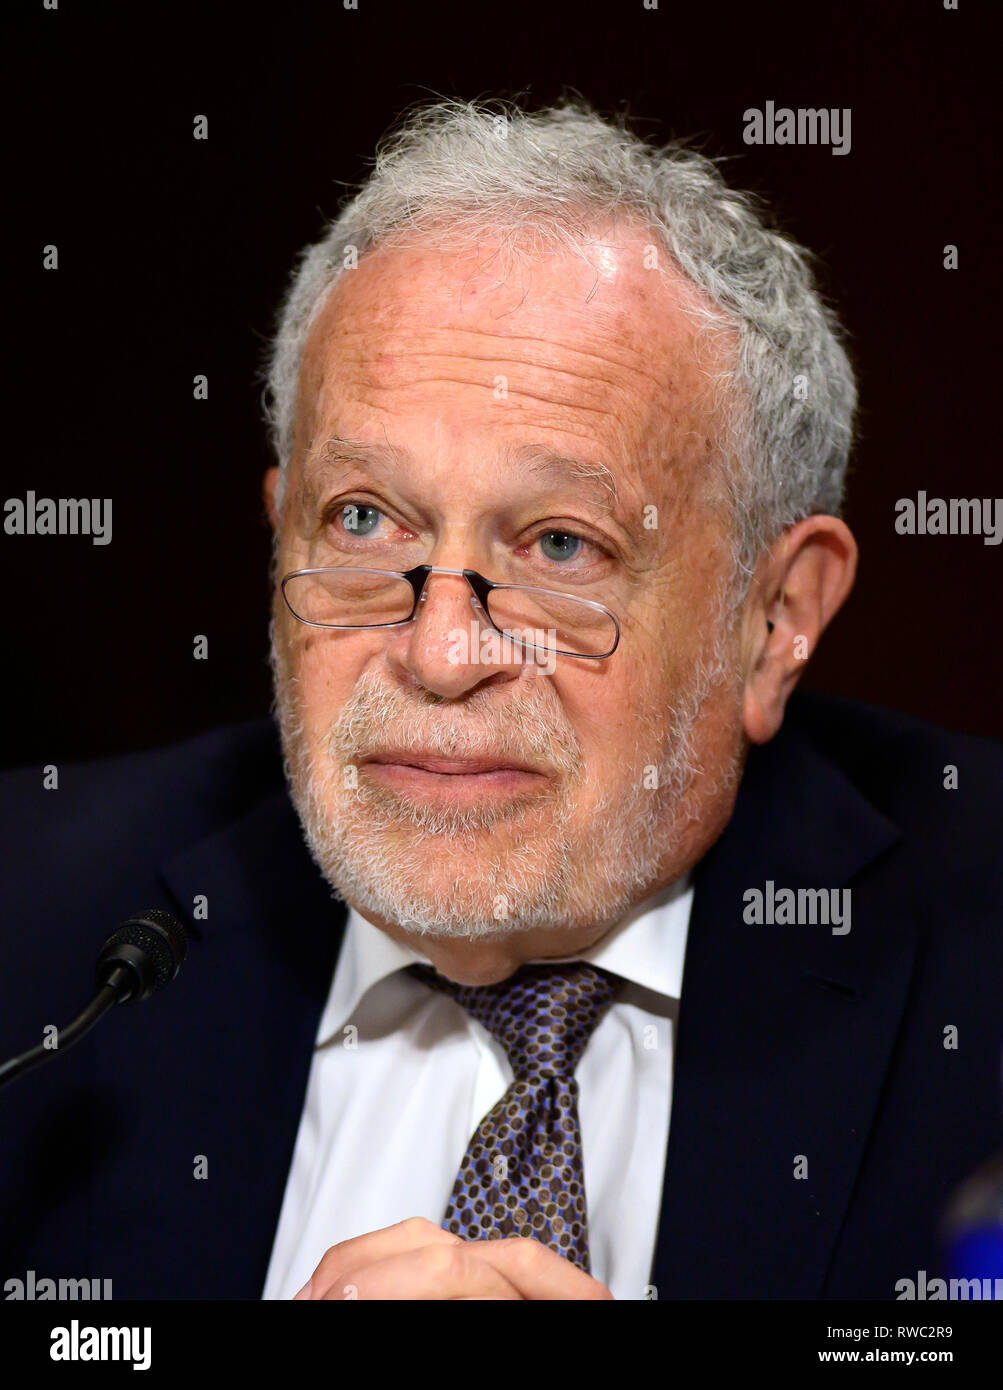 Washington, United States Of America. 05th Mar, 2019. Robert B. Reich, Chancellor's Professor of Public Policy, Goldman School of Public Policy, University of California at Berkeley, Berkeley, California testifies during the United States Senate Committee on the Judiciary Subcommittee on Antitrust, Competition Policy, and Consumer Rights hearing on 'Does America Have a Monopoly Problem?: Examining Concentration and Competition in the US Economy' on Capitol Hill in Washington, DC on Tuesday, March 5, 2018. Credit: Ron Sachs/CNP | usage worldwide Credit: dpa/Alamy Live News Stock Photo